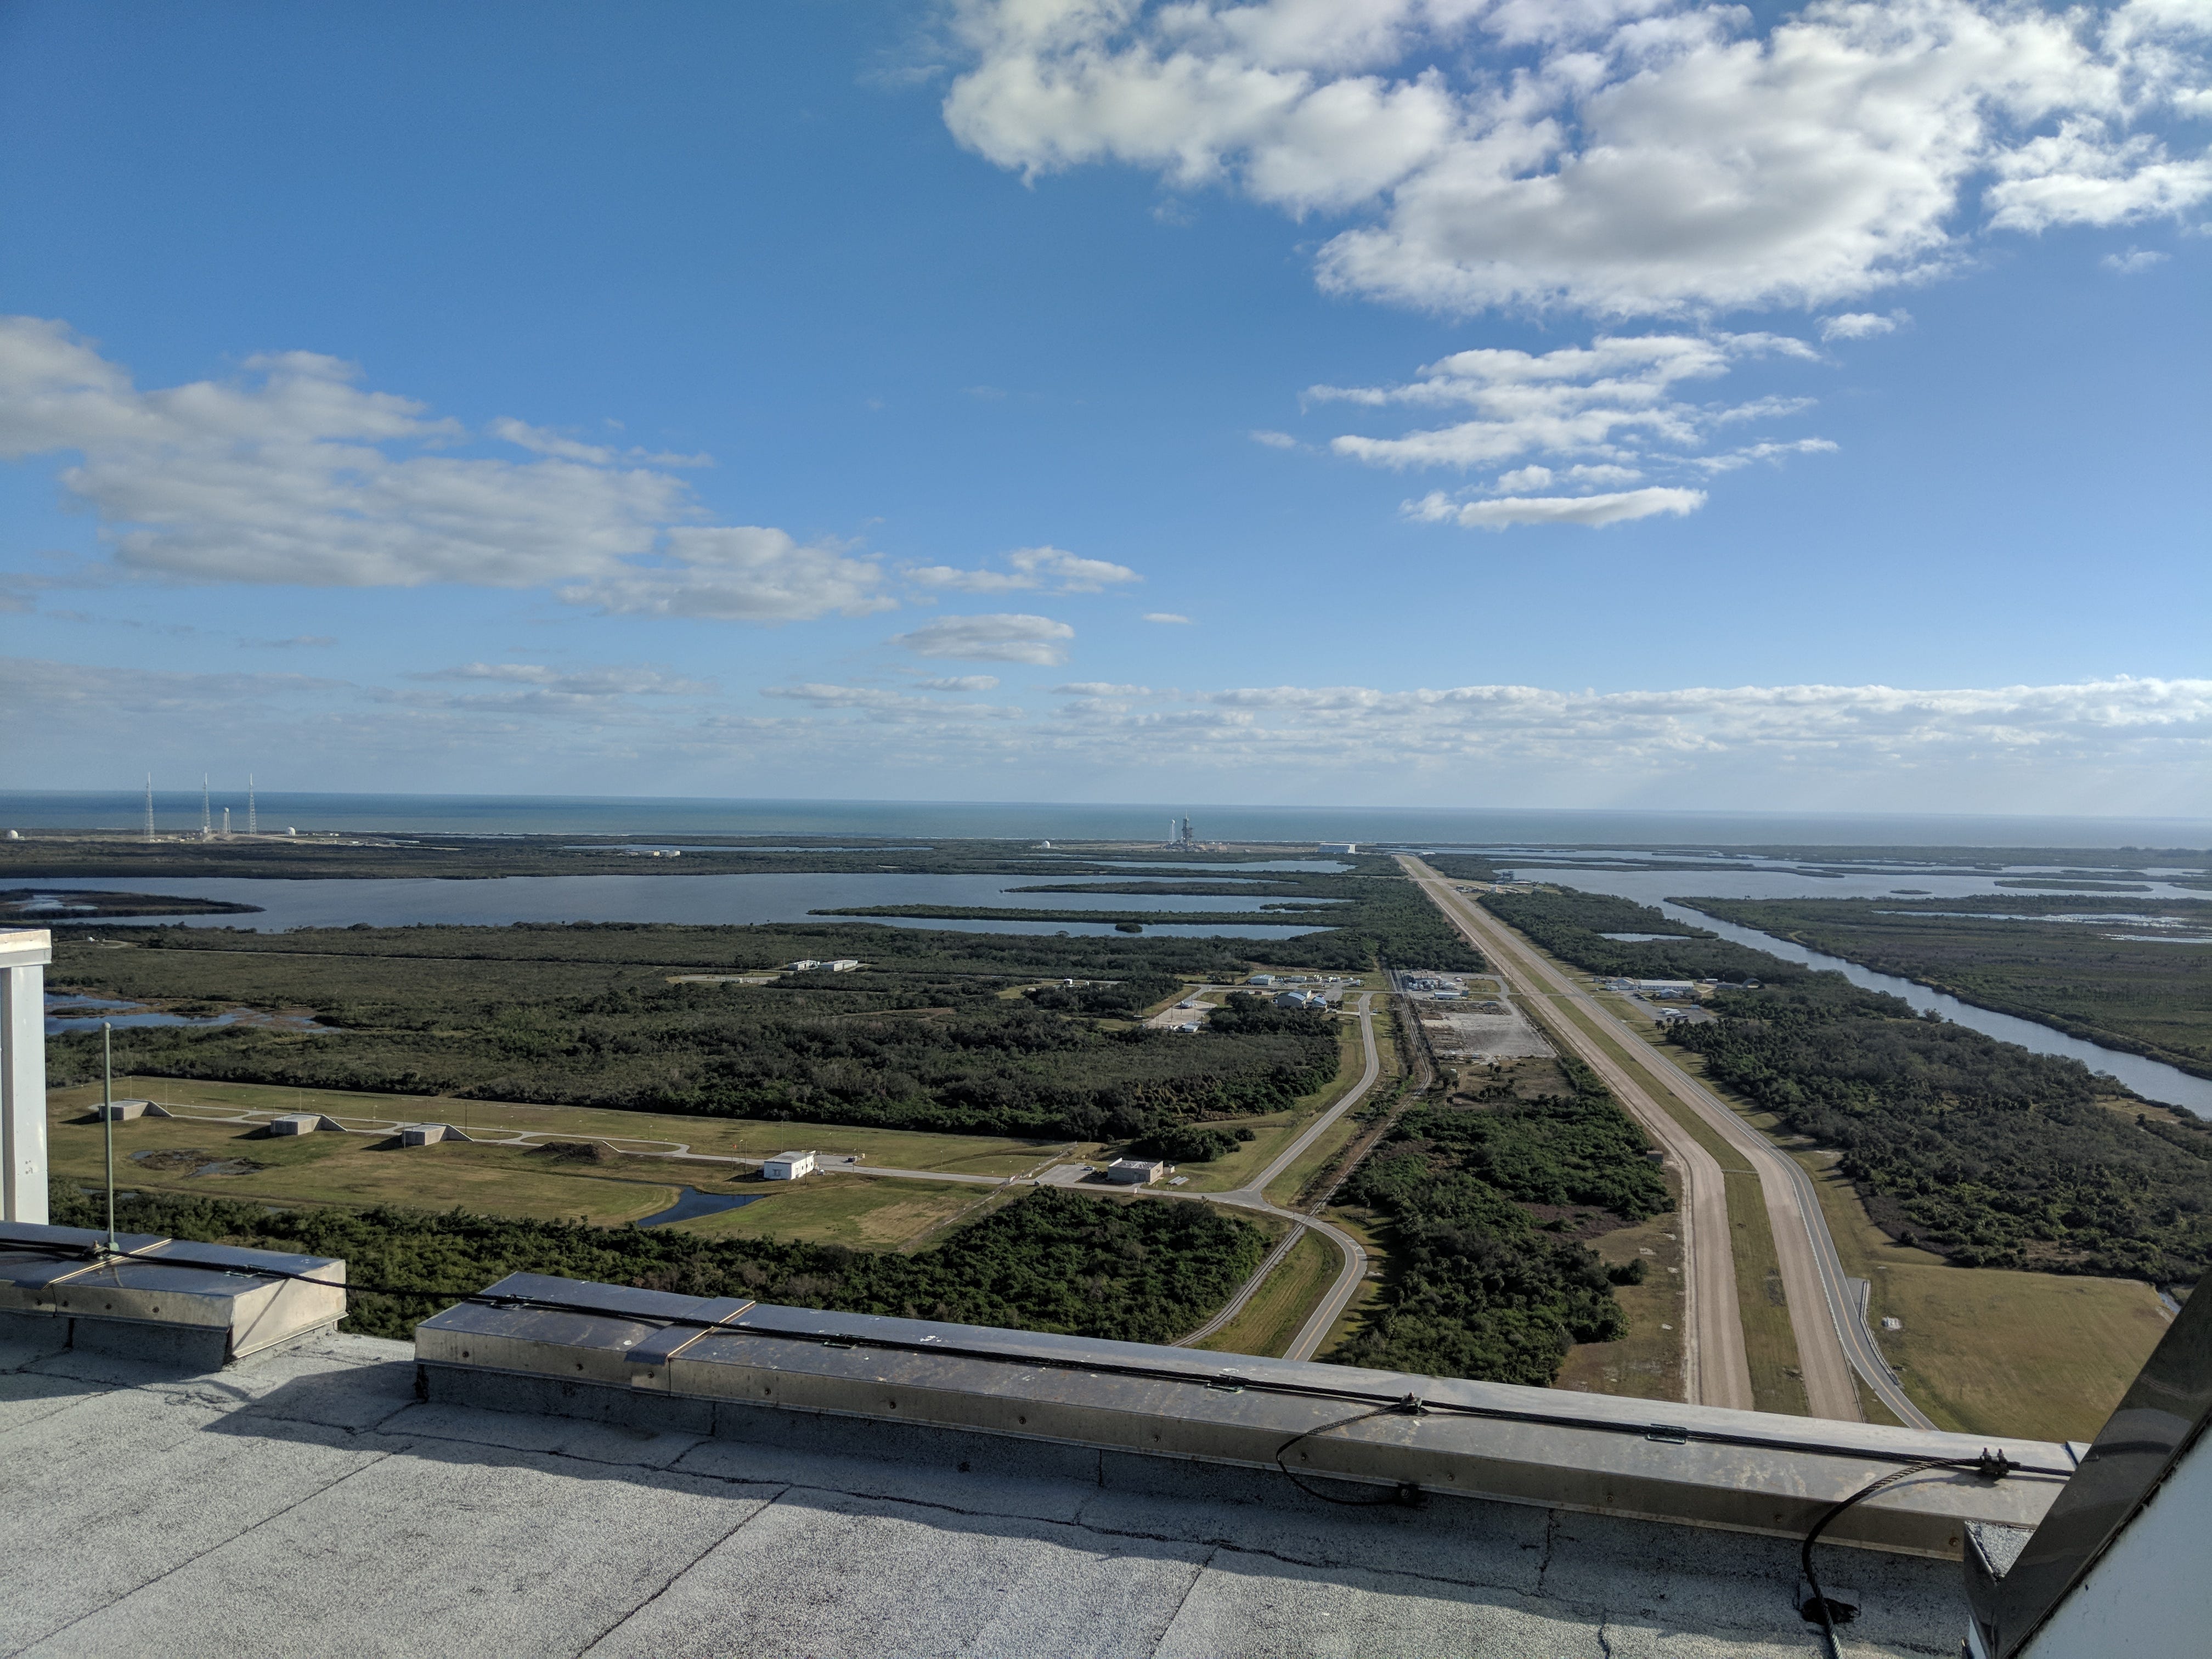 Overlooking Launch Complex 39A from the Vehicle Assembly Building's roof